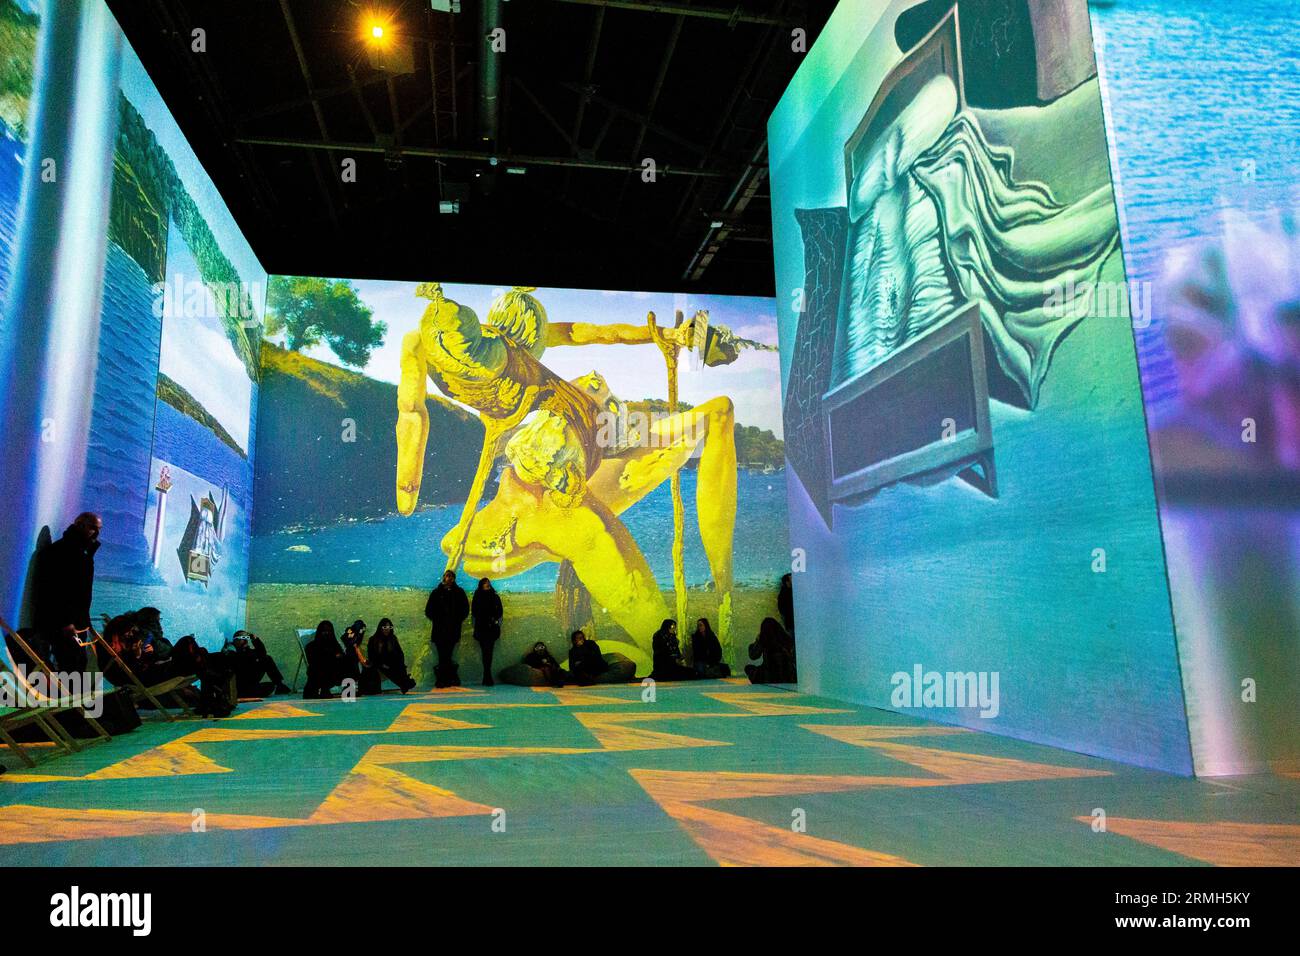 Art projections at the Dalí Cybernetics London: The Immersive Experience, London, England Stock Photo